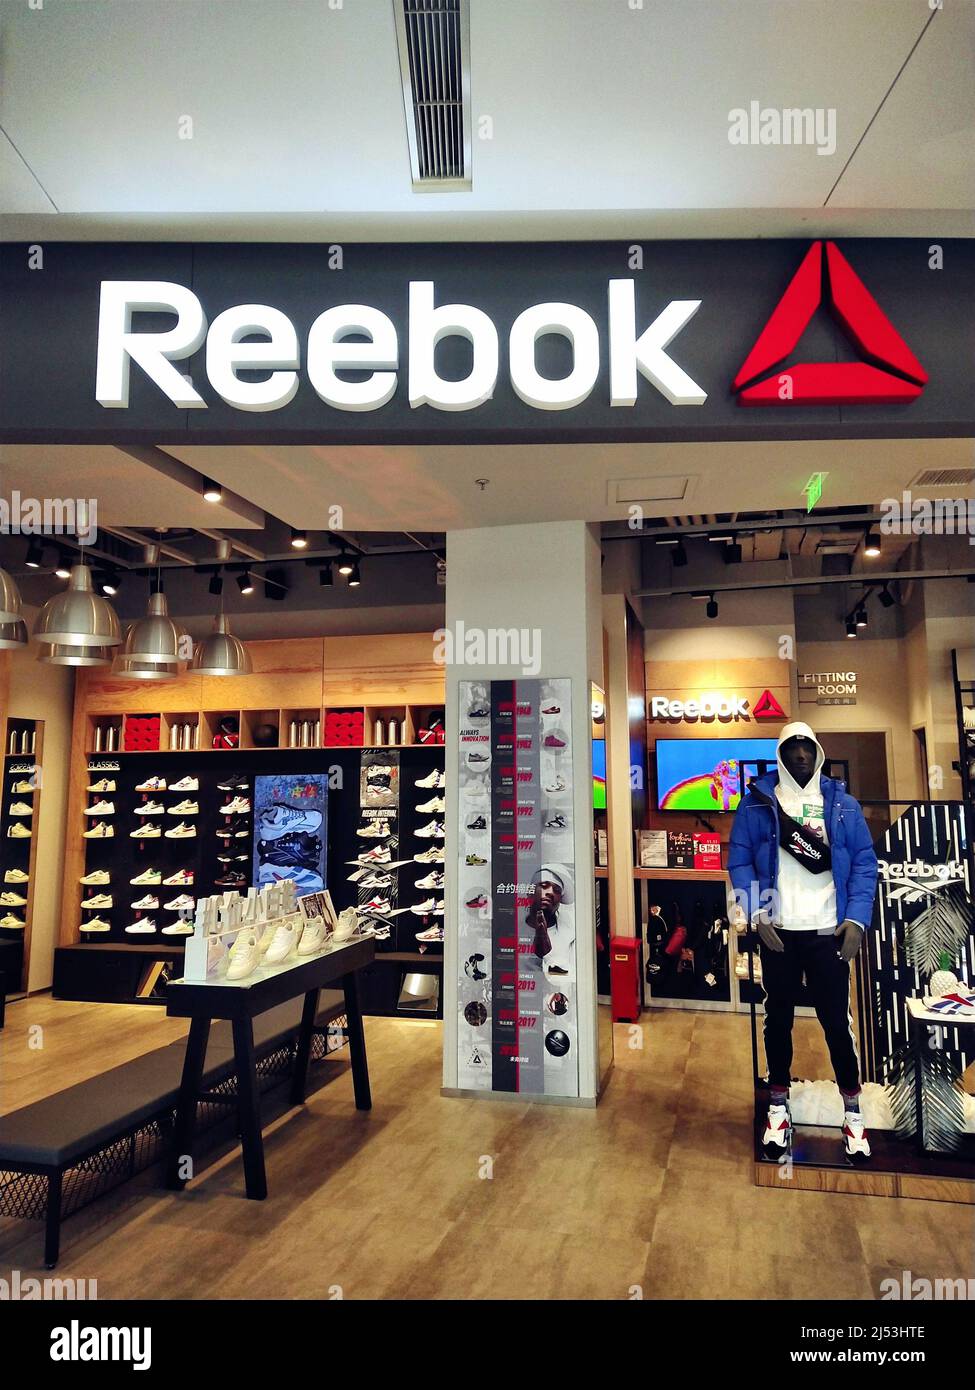 Eastern Hørehæmmet strøm SHANGHAI, CHINA - OCTOBER 13, 2019 - Photo taken on Oct. 13, 2019 shows a REEBOK  store in Shanghai, China. On April 18, 2022, several consumers said they  received a text message